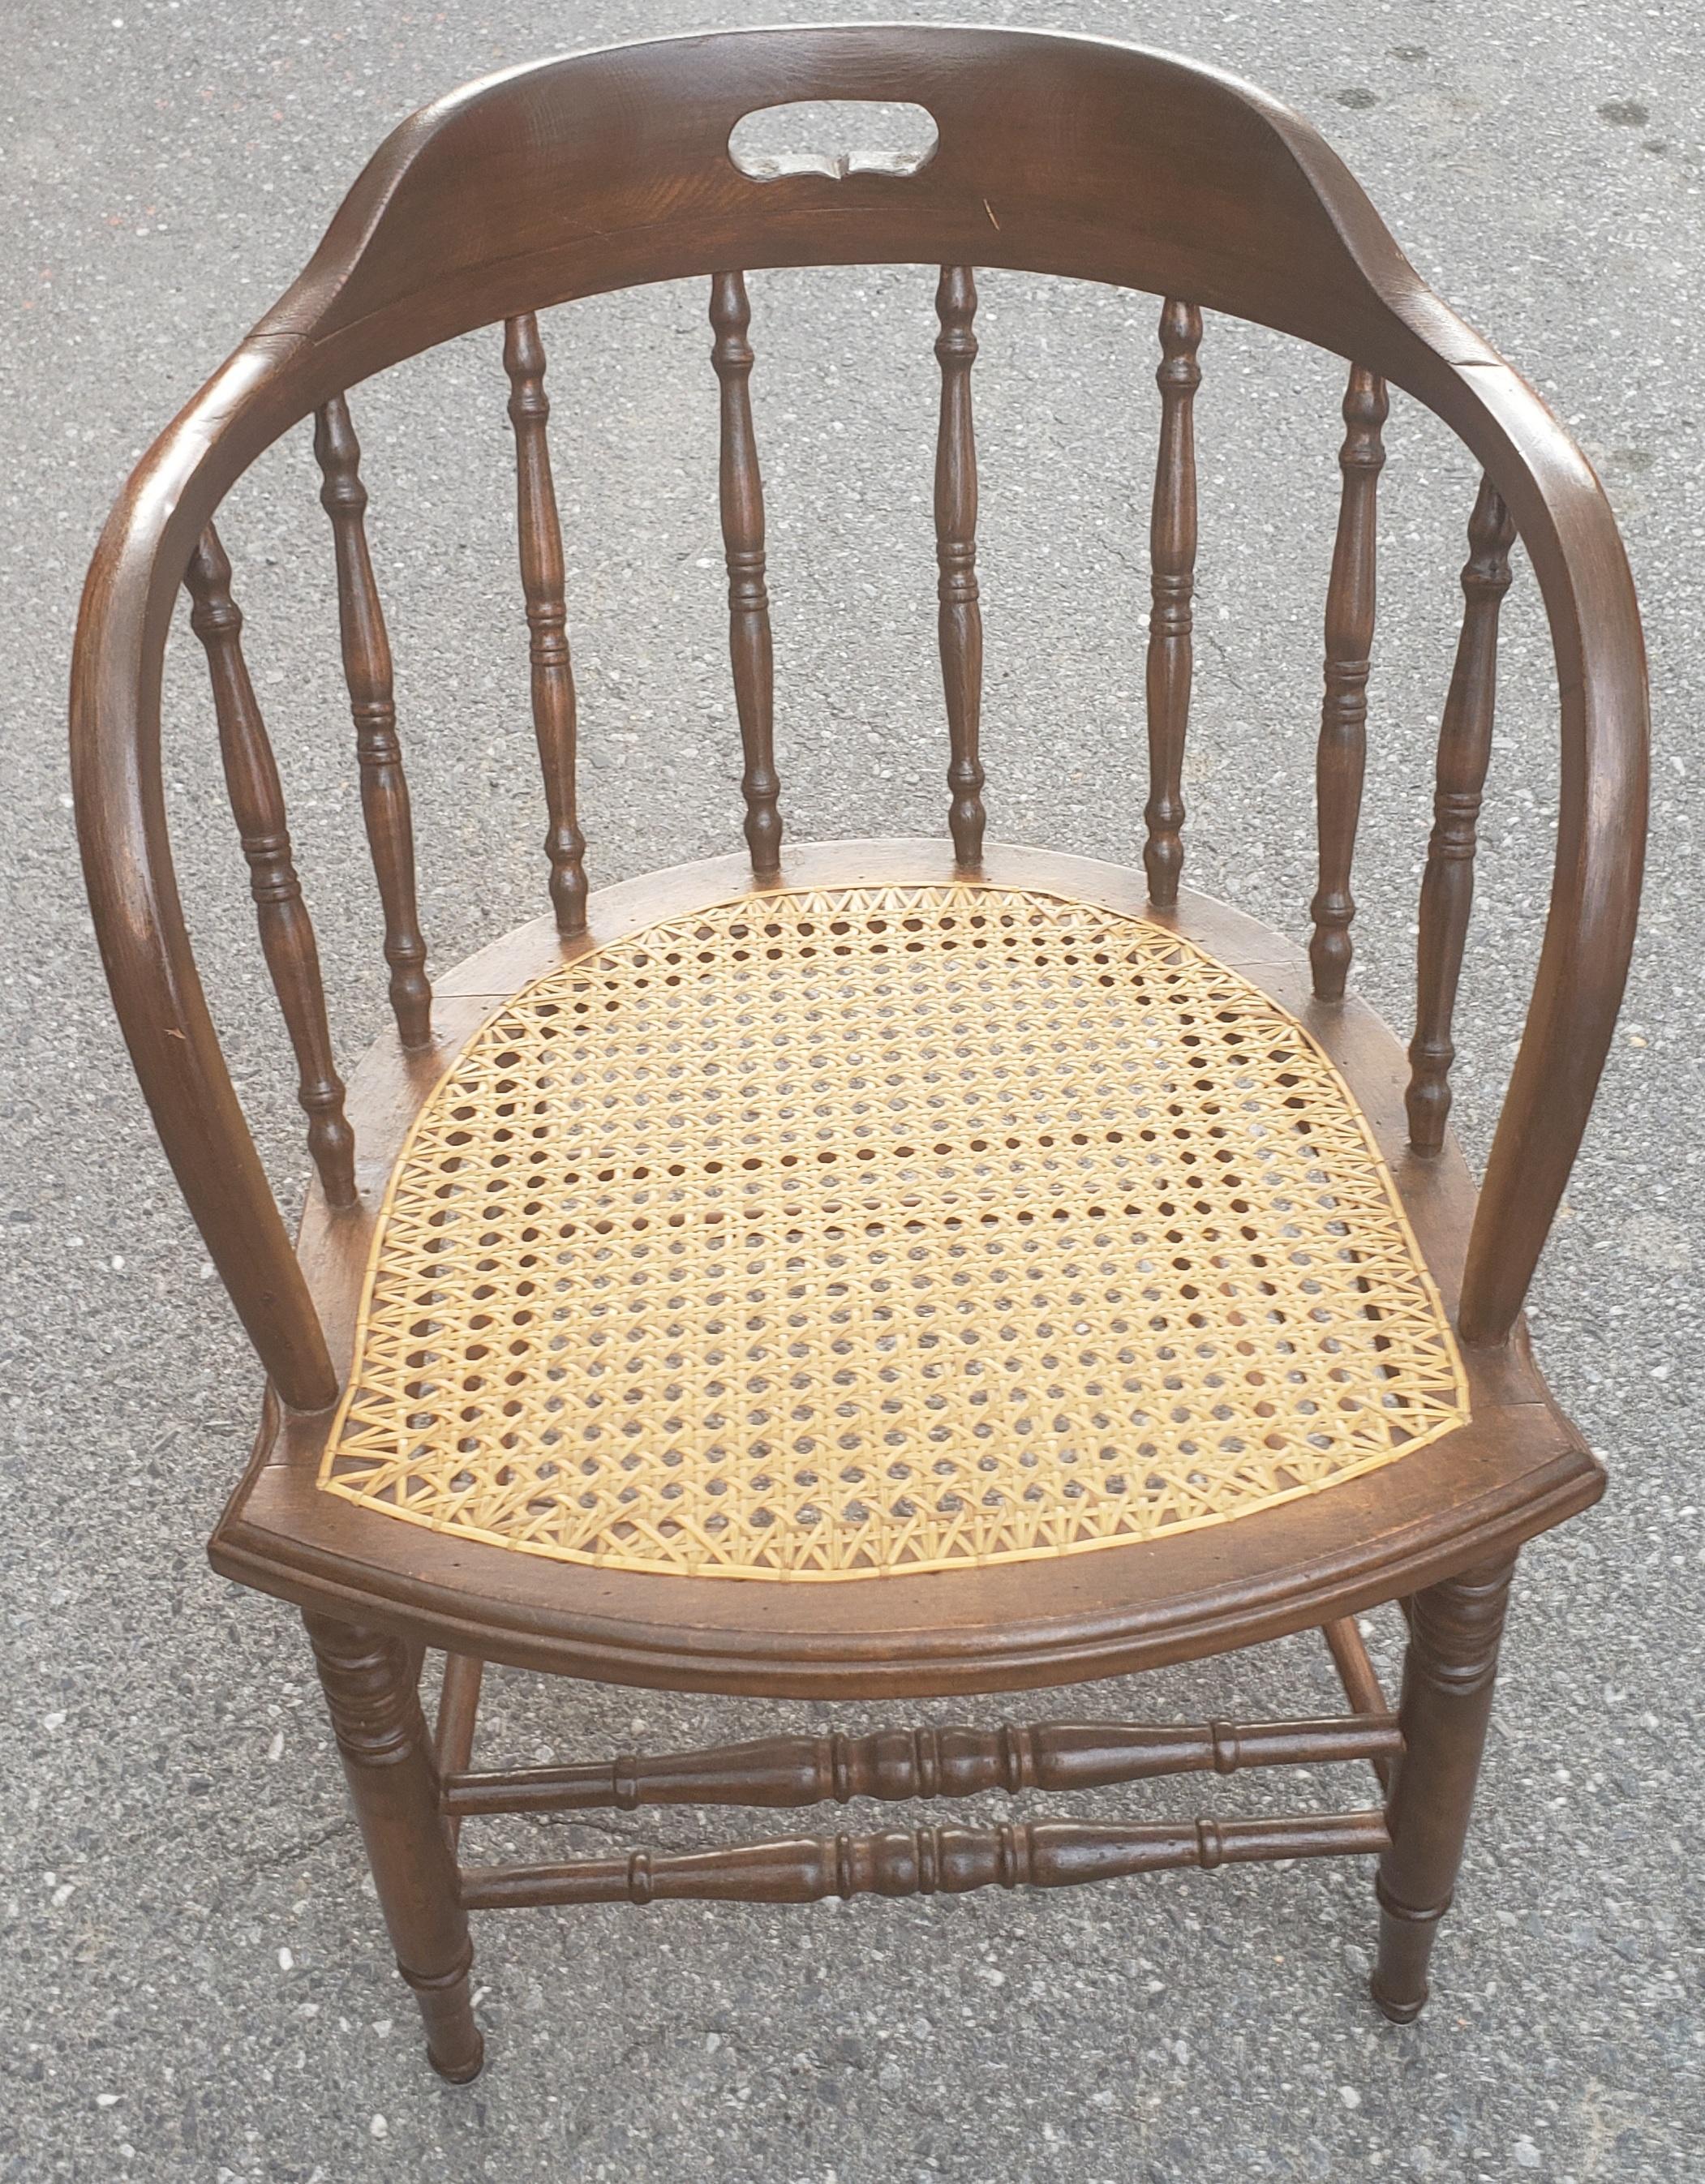 Hand-Crafted Antique Barrel Back Firehouse Windsor Chair with Cane Seat